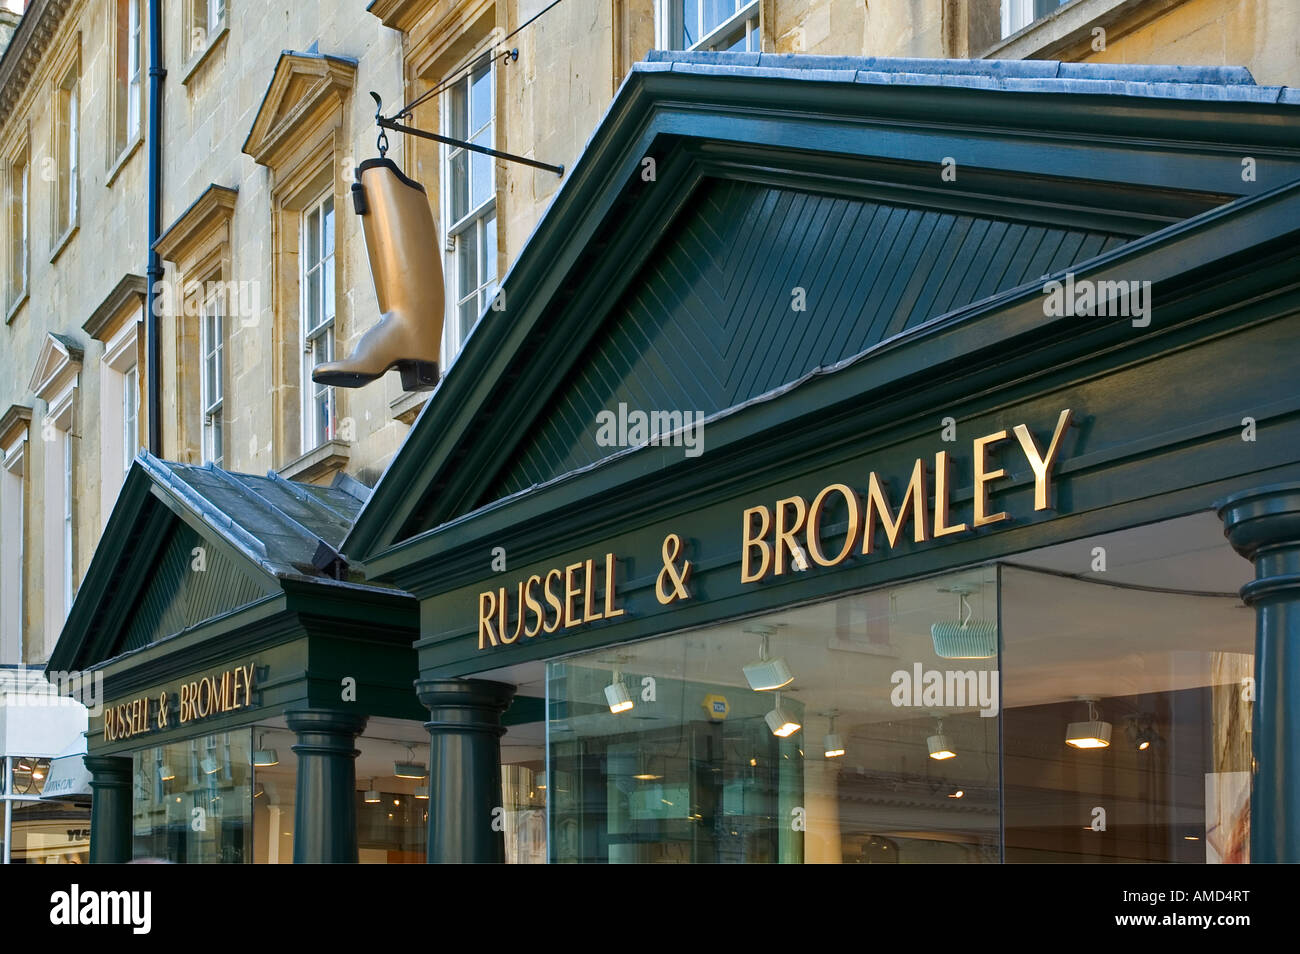 russel and bromley shopfront Stock Photo